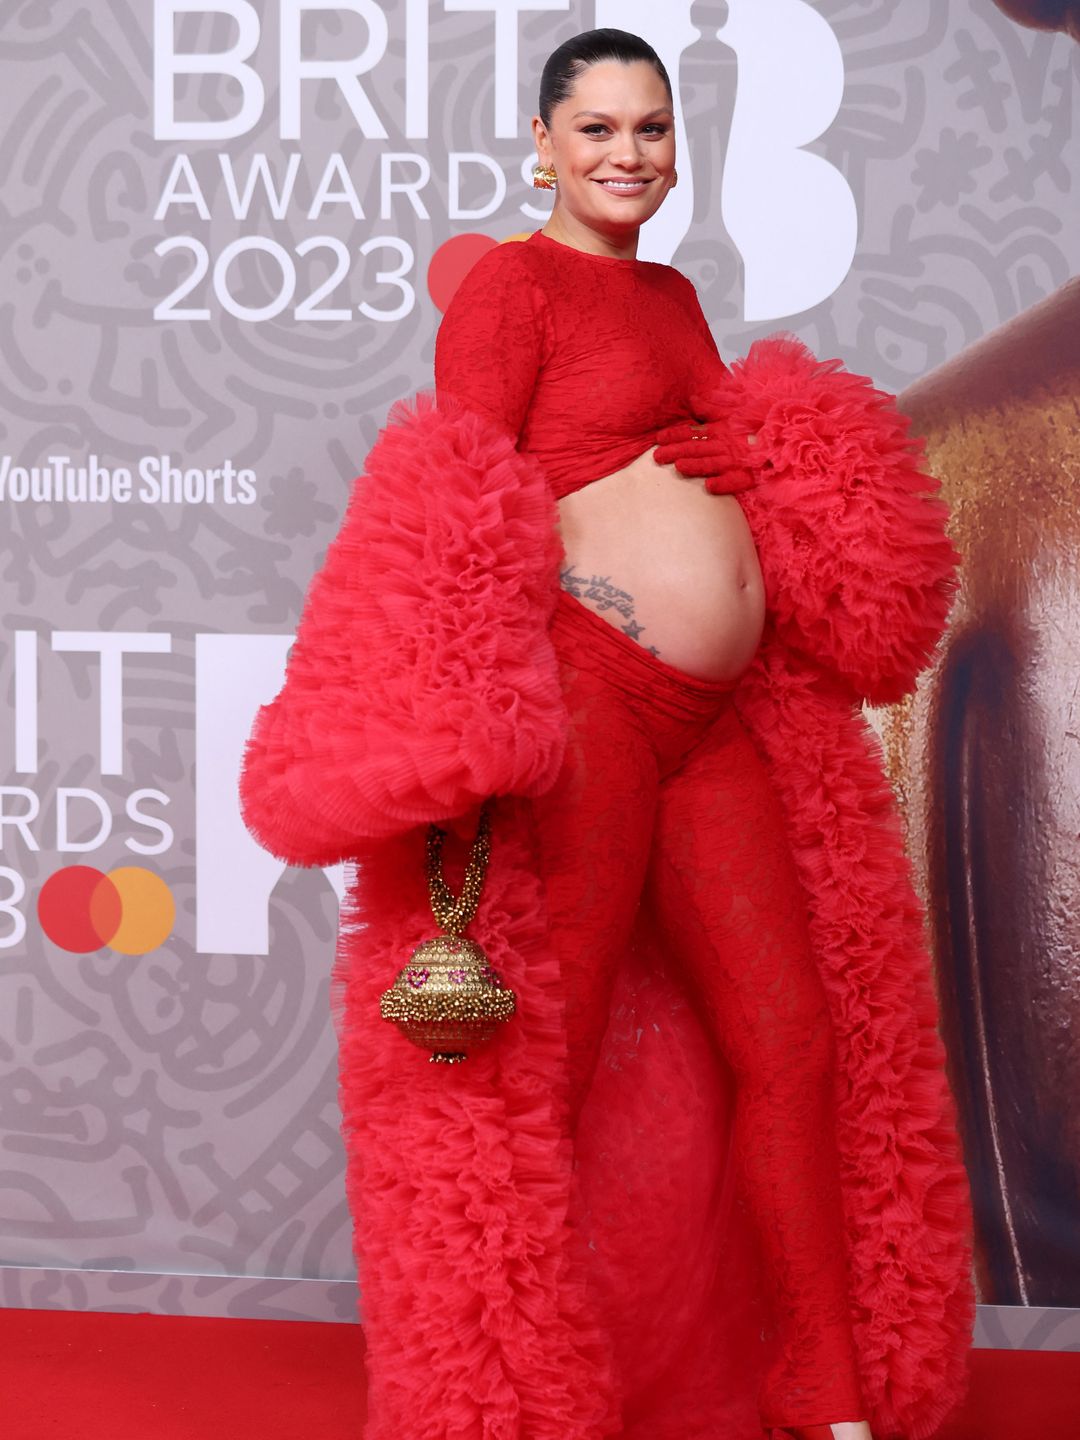 Jessie J poses on the red carpet in an all-red outfit